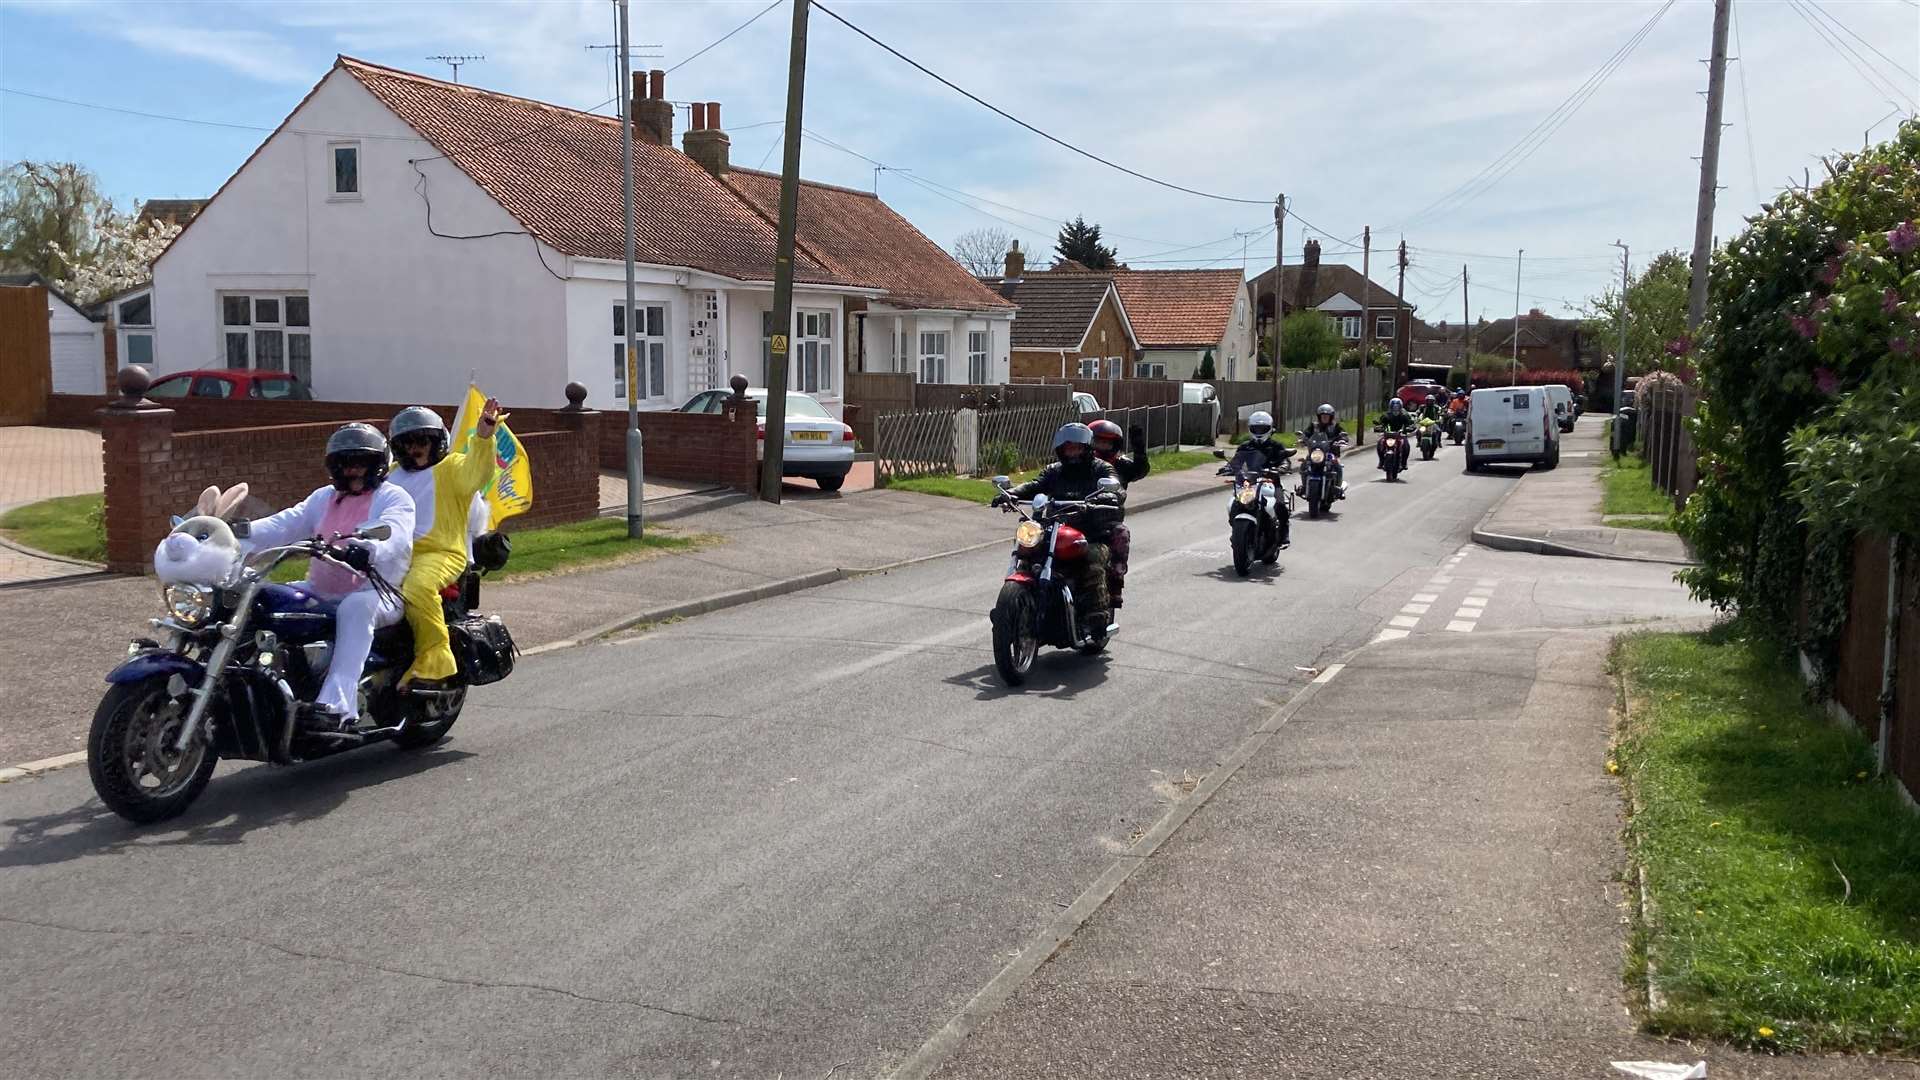 Associated Sheppey Bikers' Easter egg run paid a fleeting visit to Glenwood Drive, Minster, on Sunday